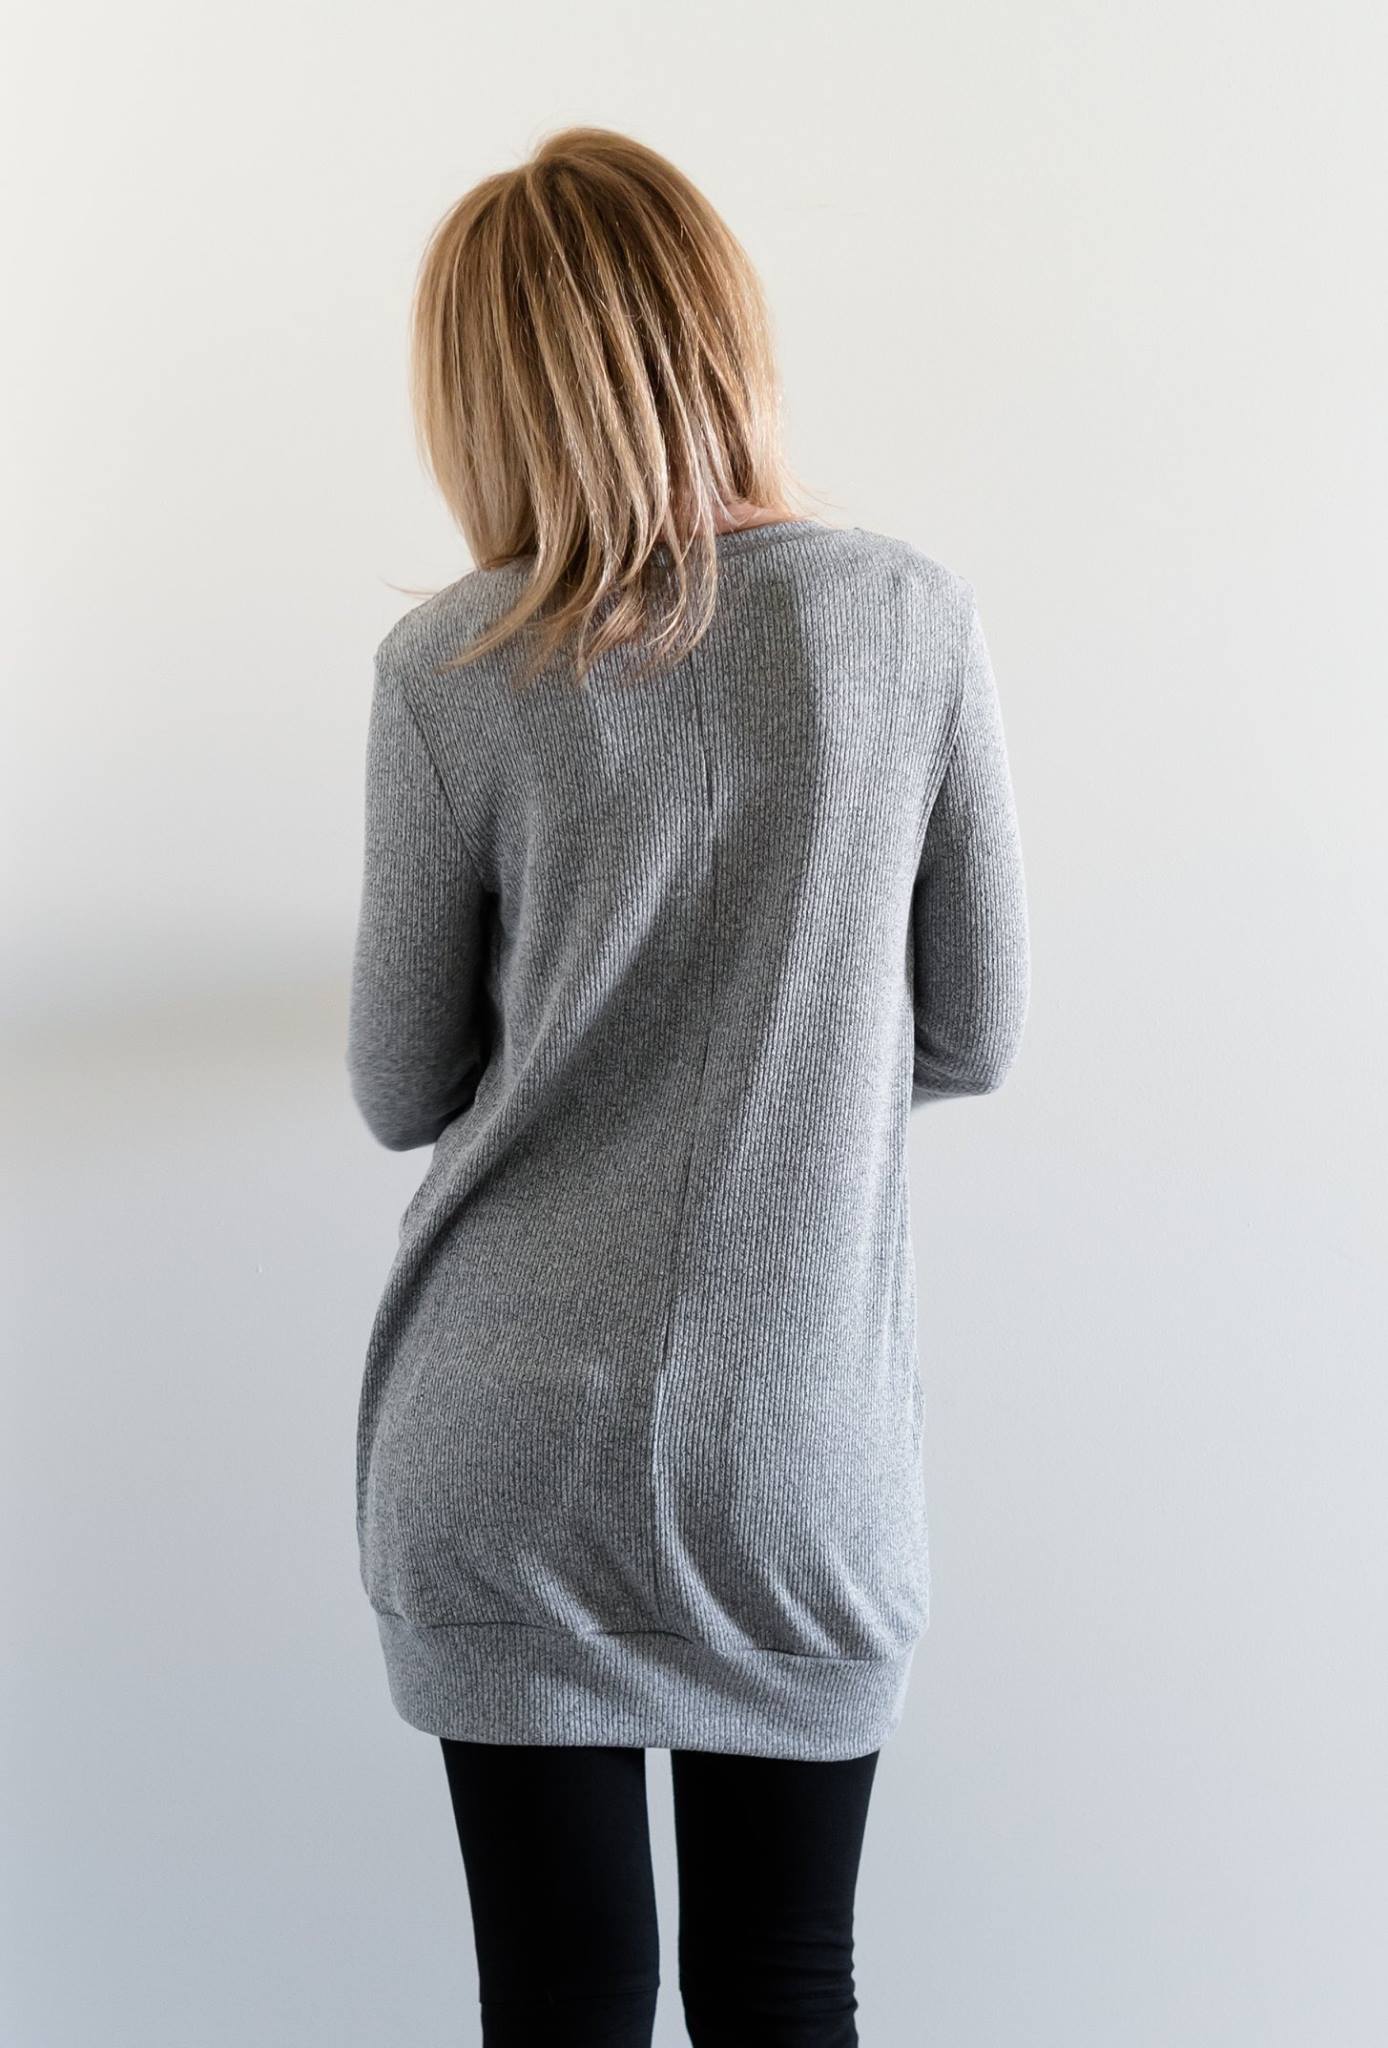 Back view of the Nora Sweater with long sleeves and banded hem. Misses size. 